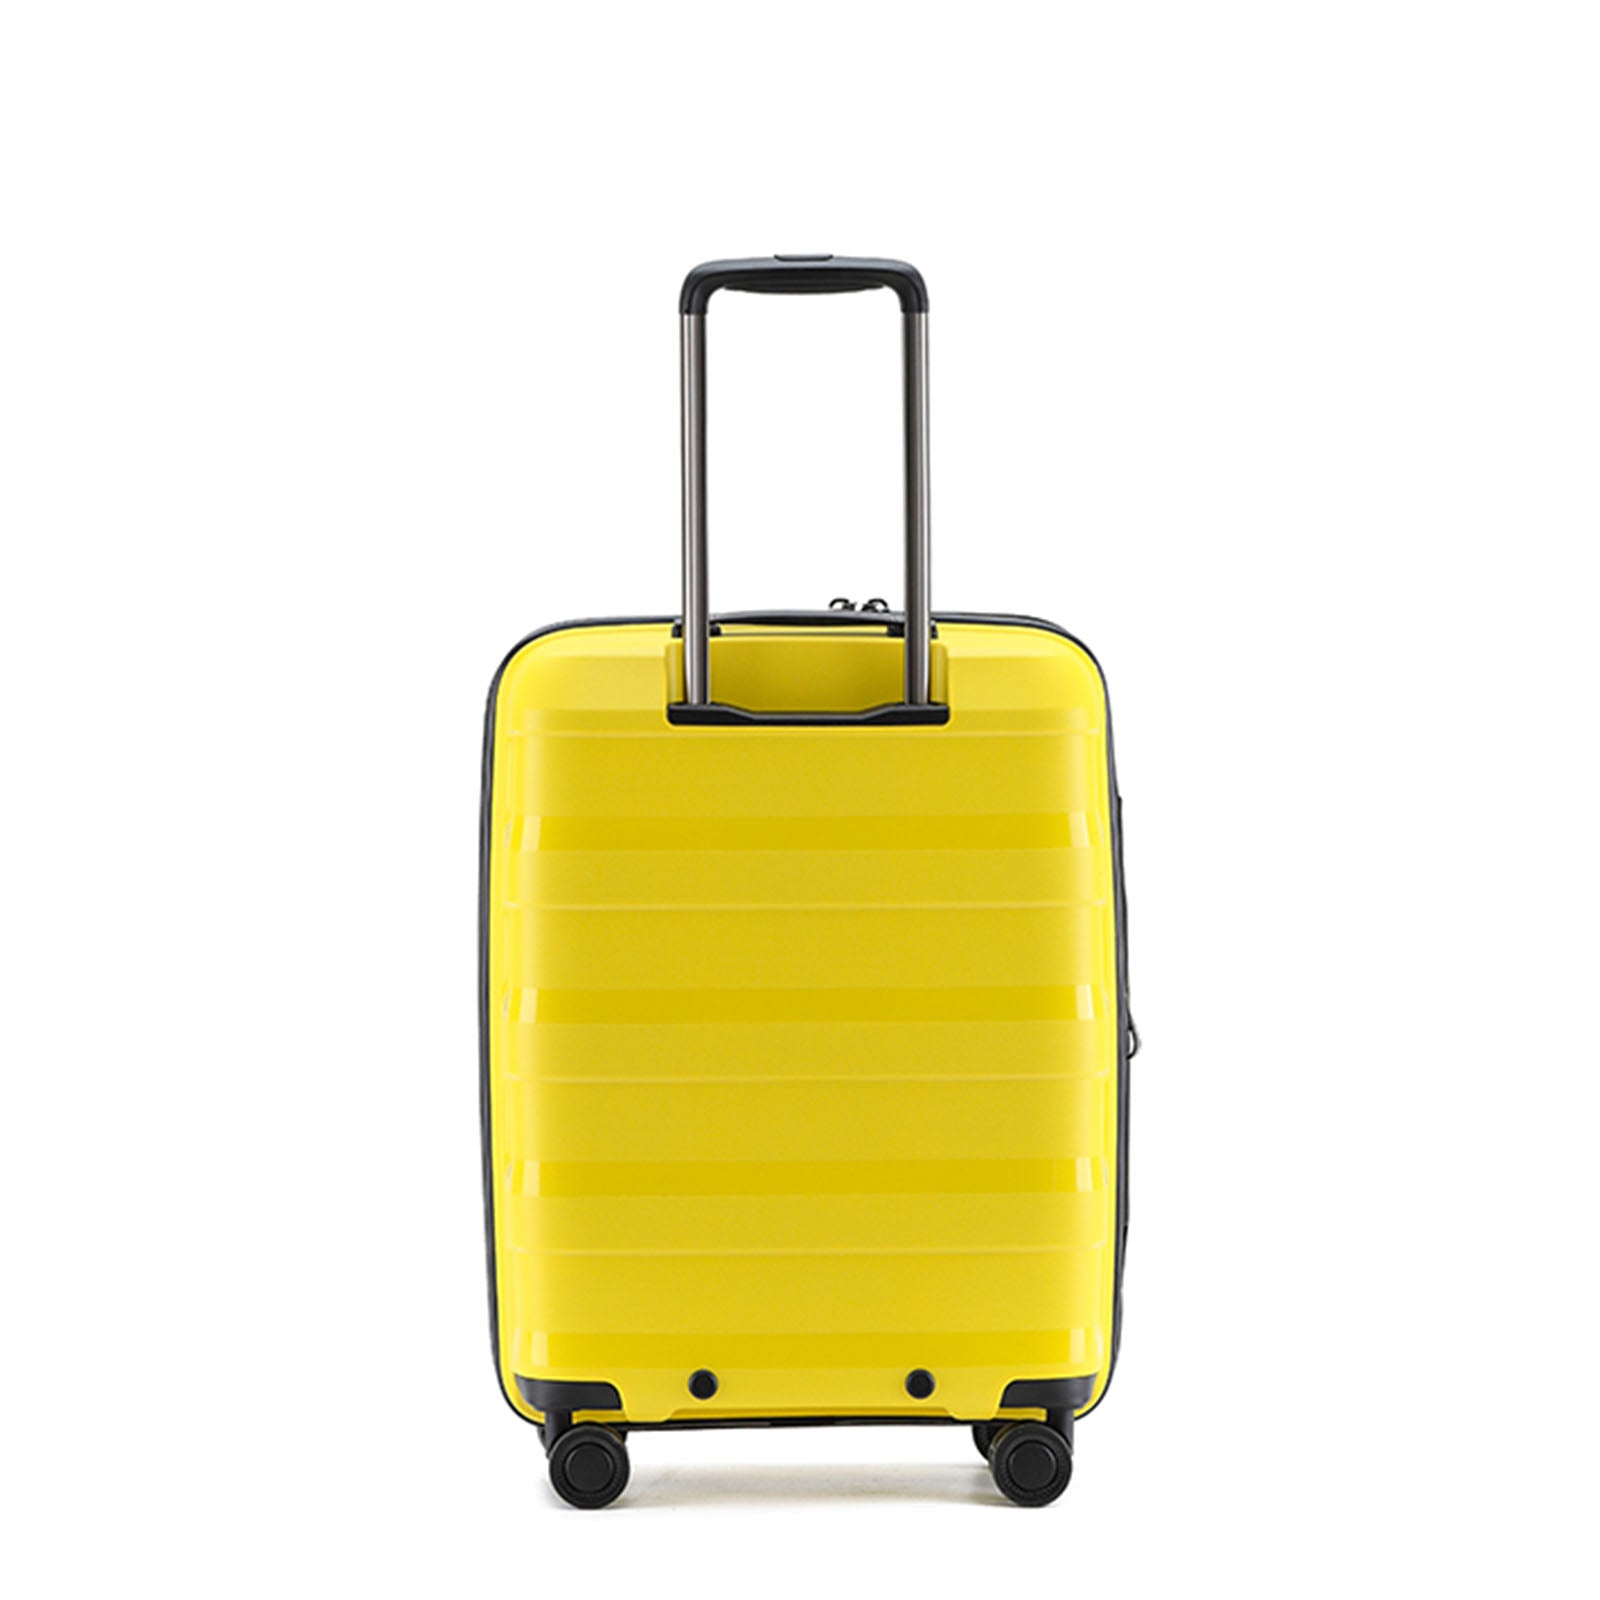 Tosca-Comet-4-Wheel-55cm-Carry-On-Suitcase-Yellow-Back